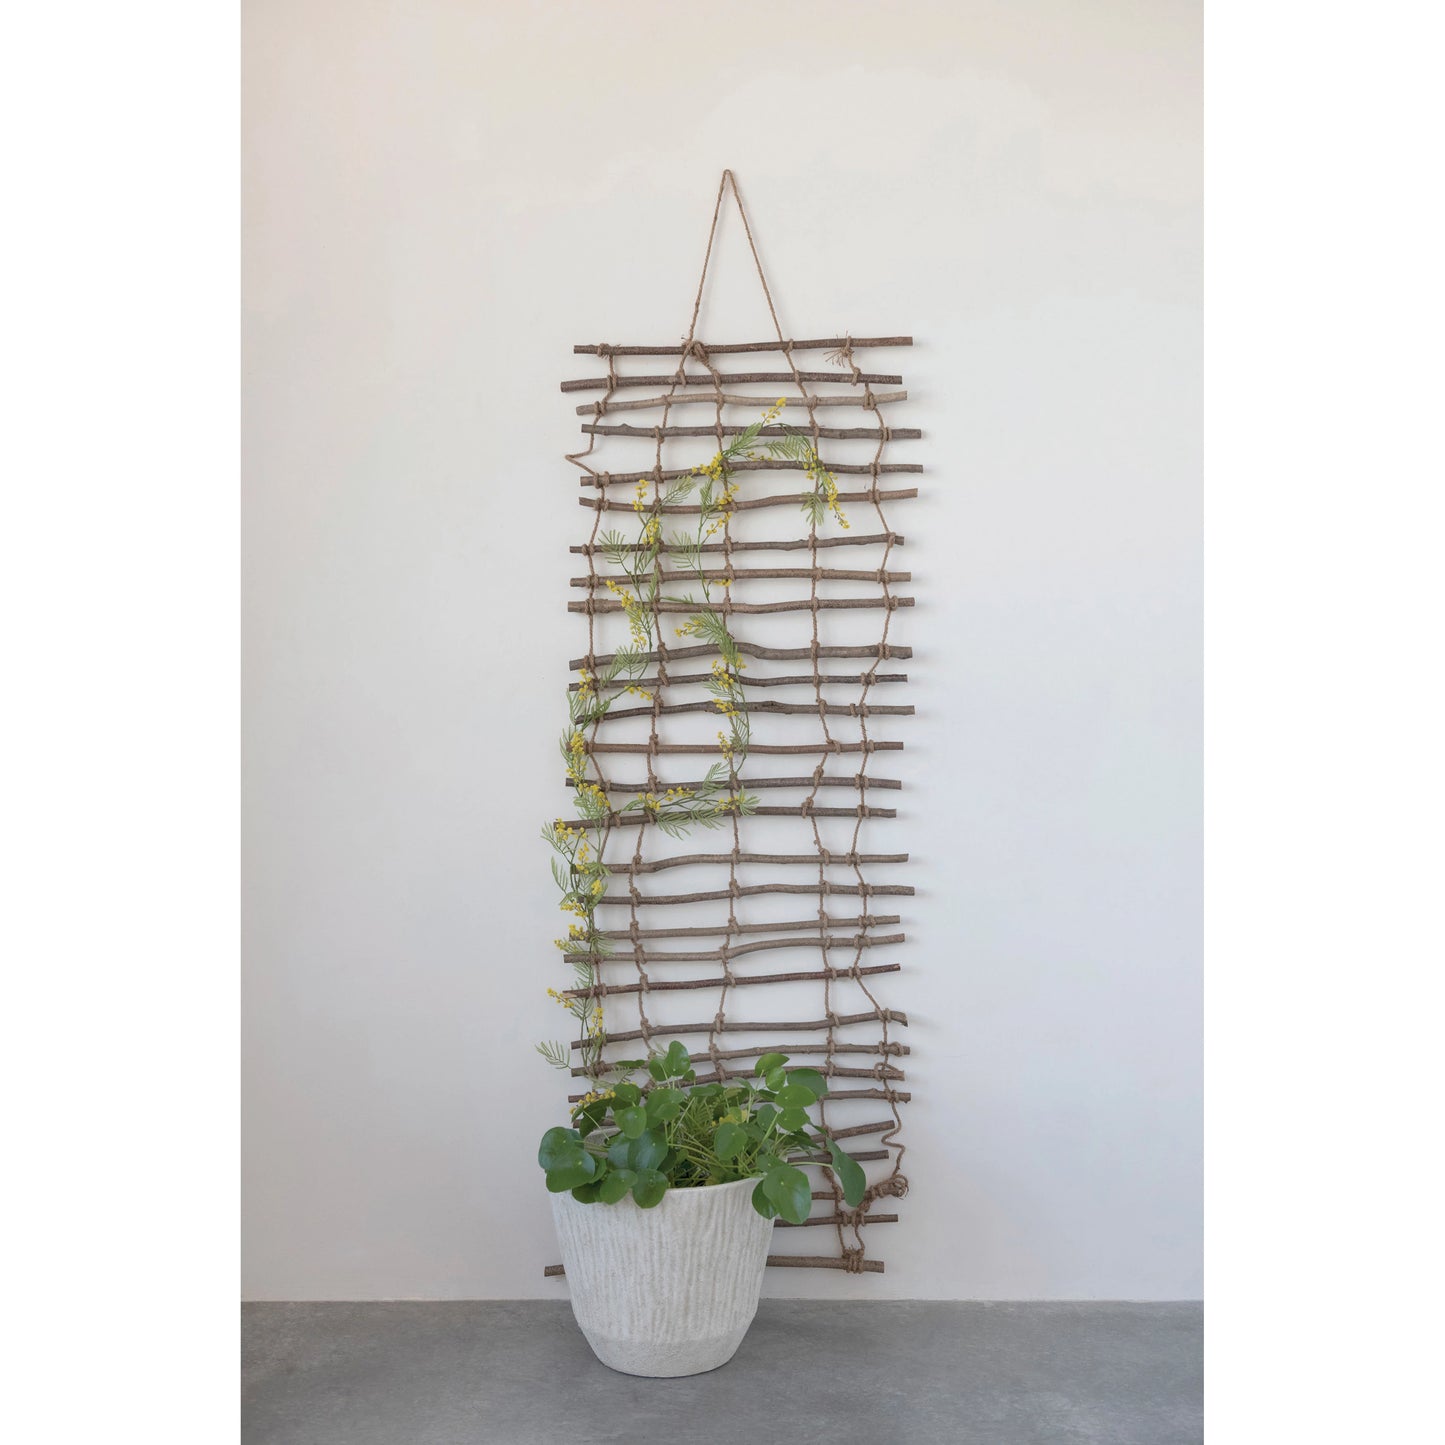 wood and jute wall trellis hanging on a white wall with vines growing up it in front of a flower pot